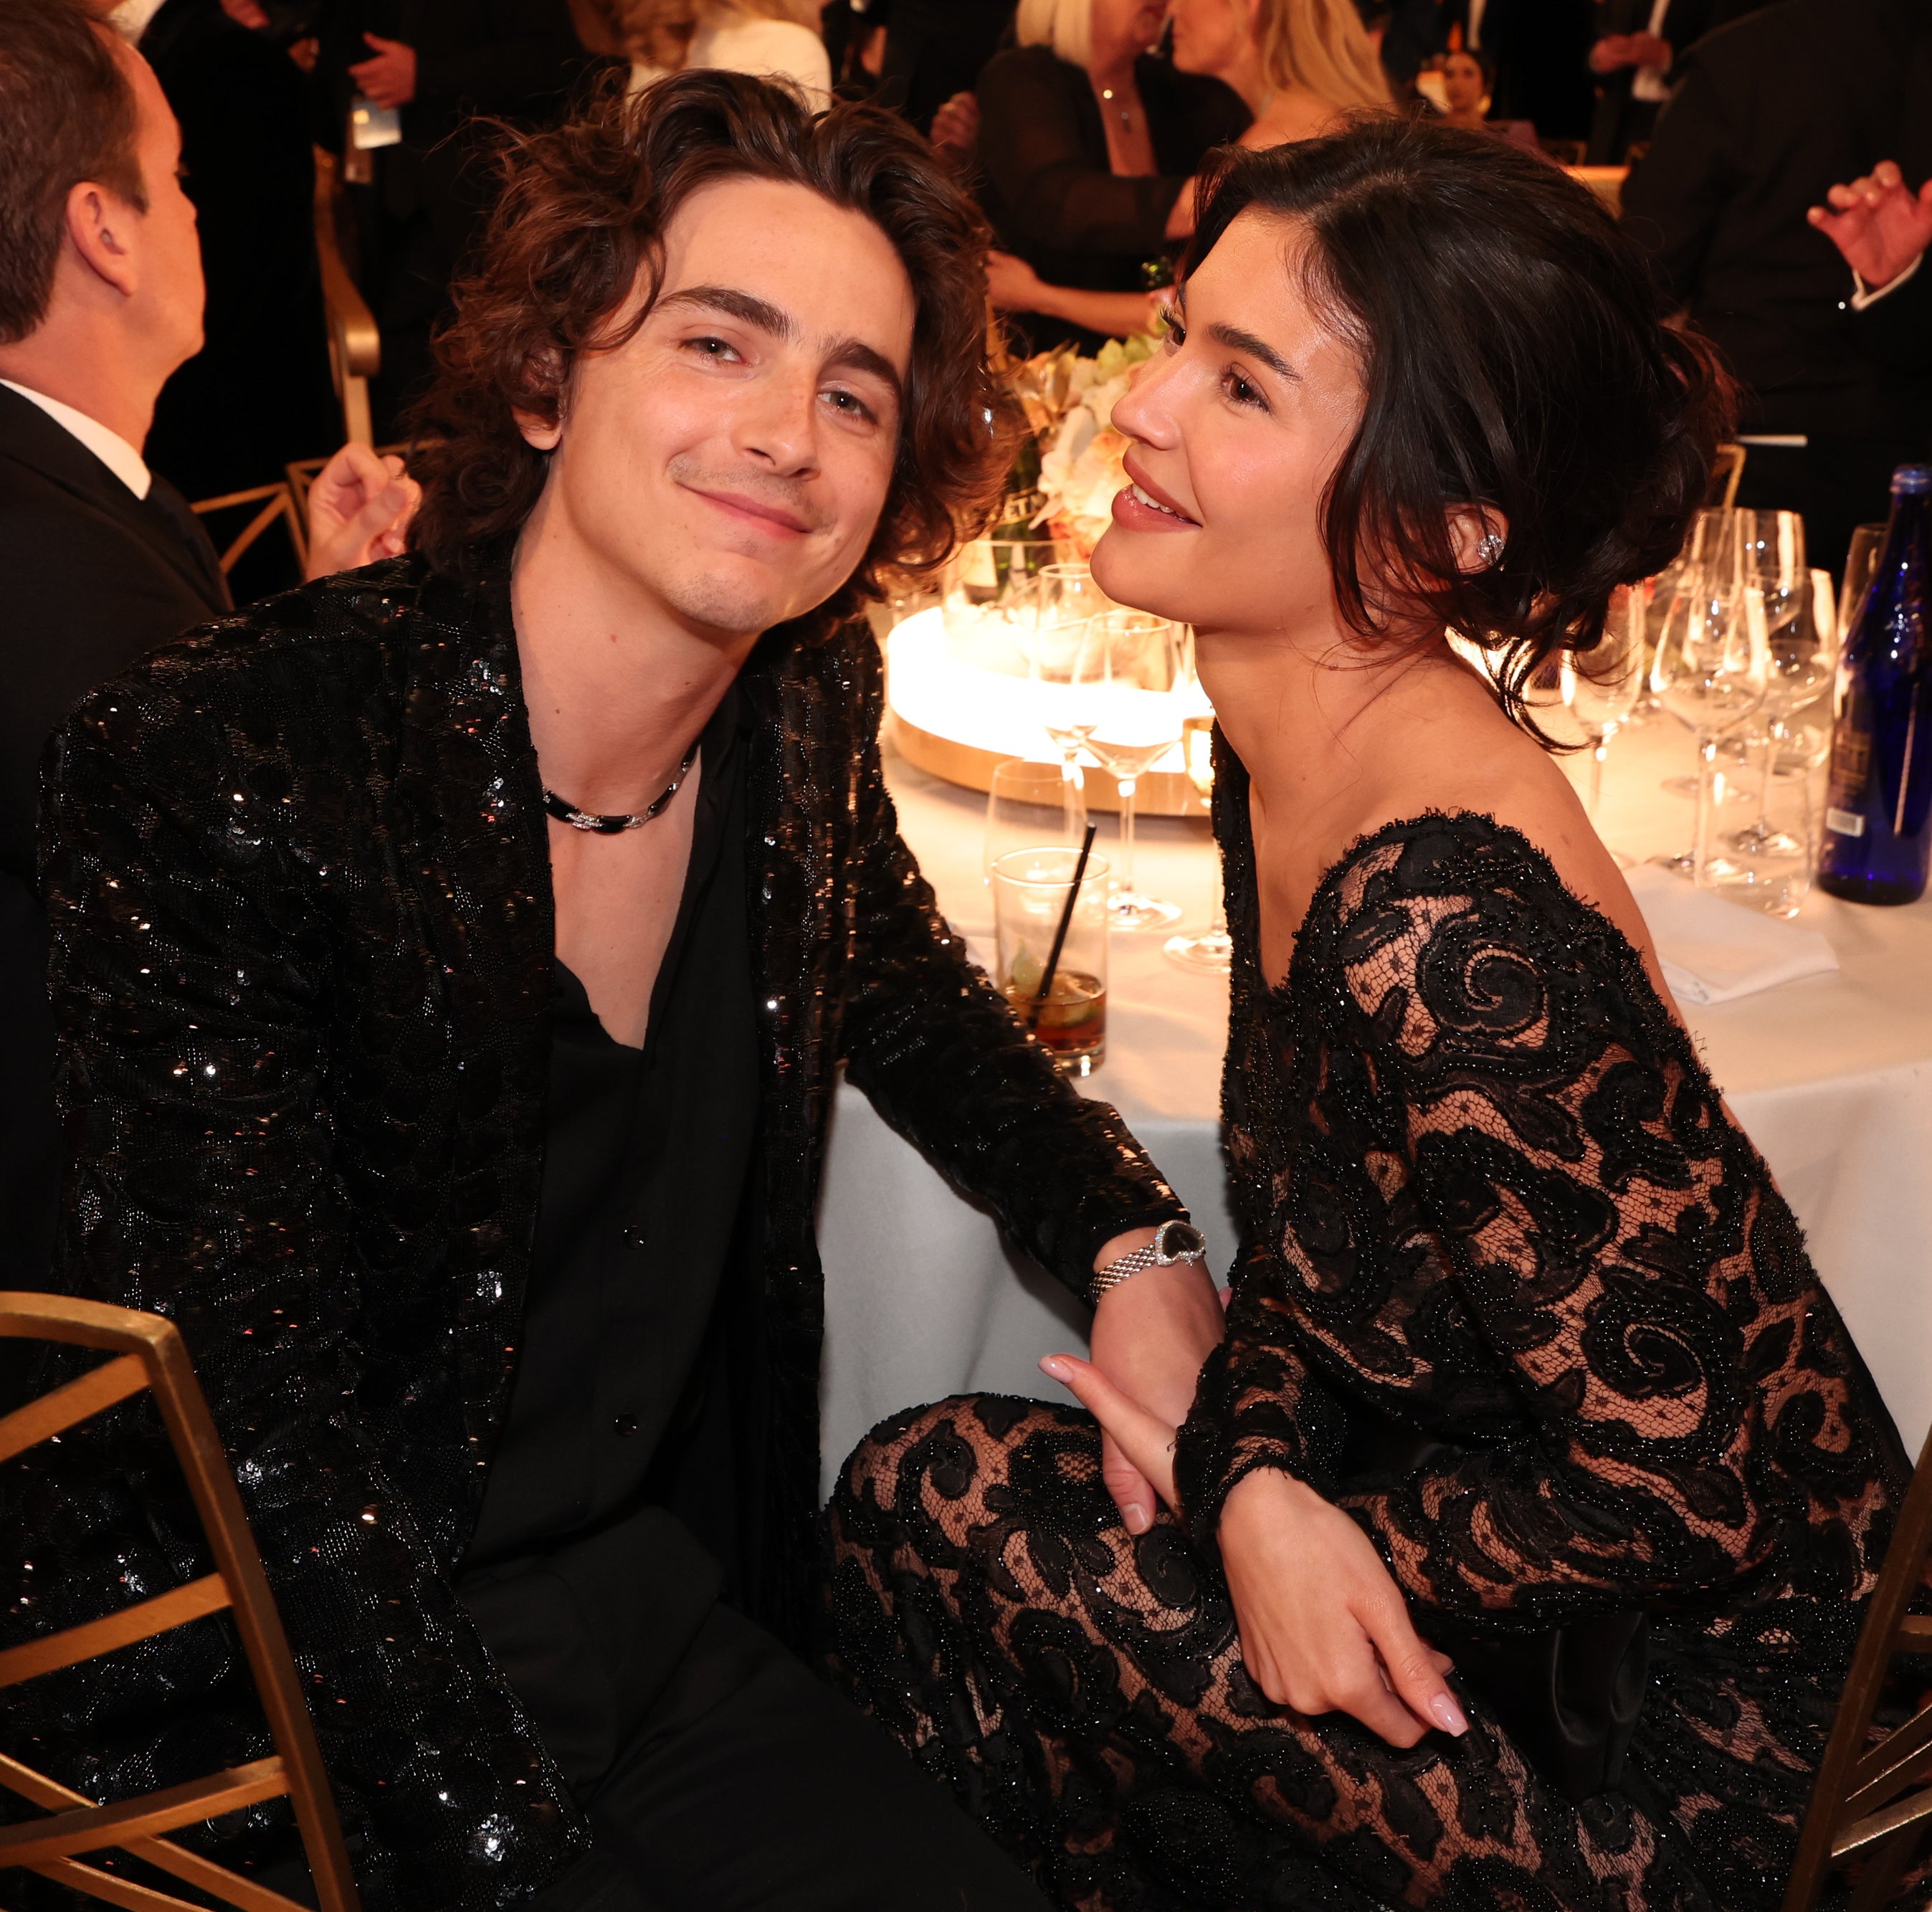 kylie and timmy holding hands and sitting at their table at the golden globes